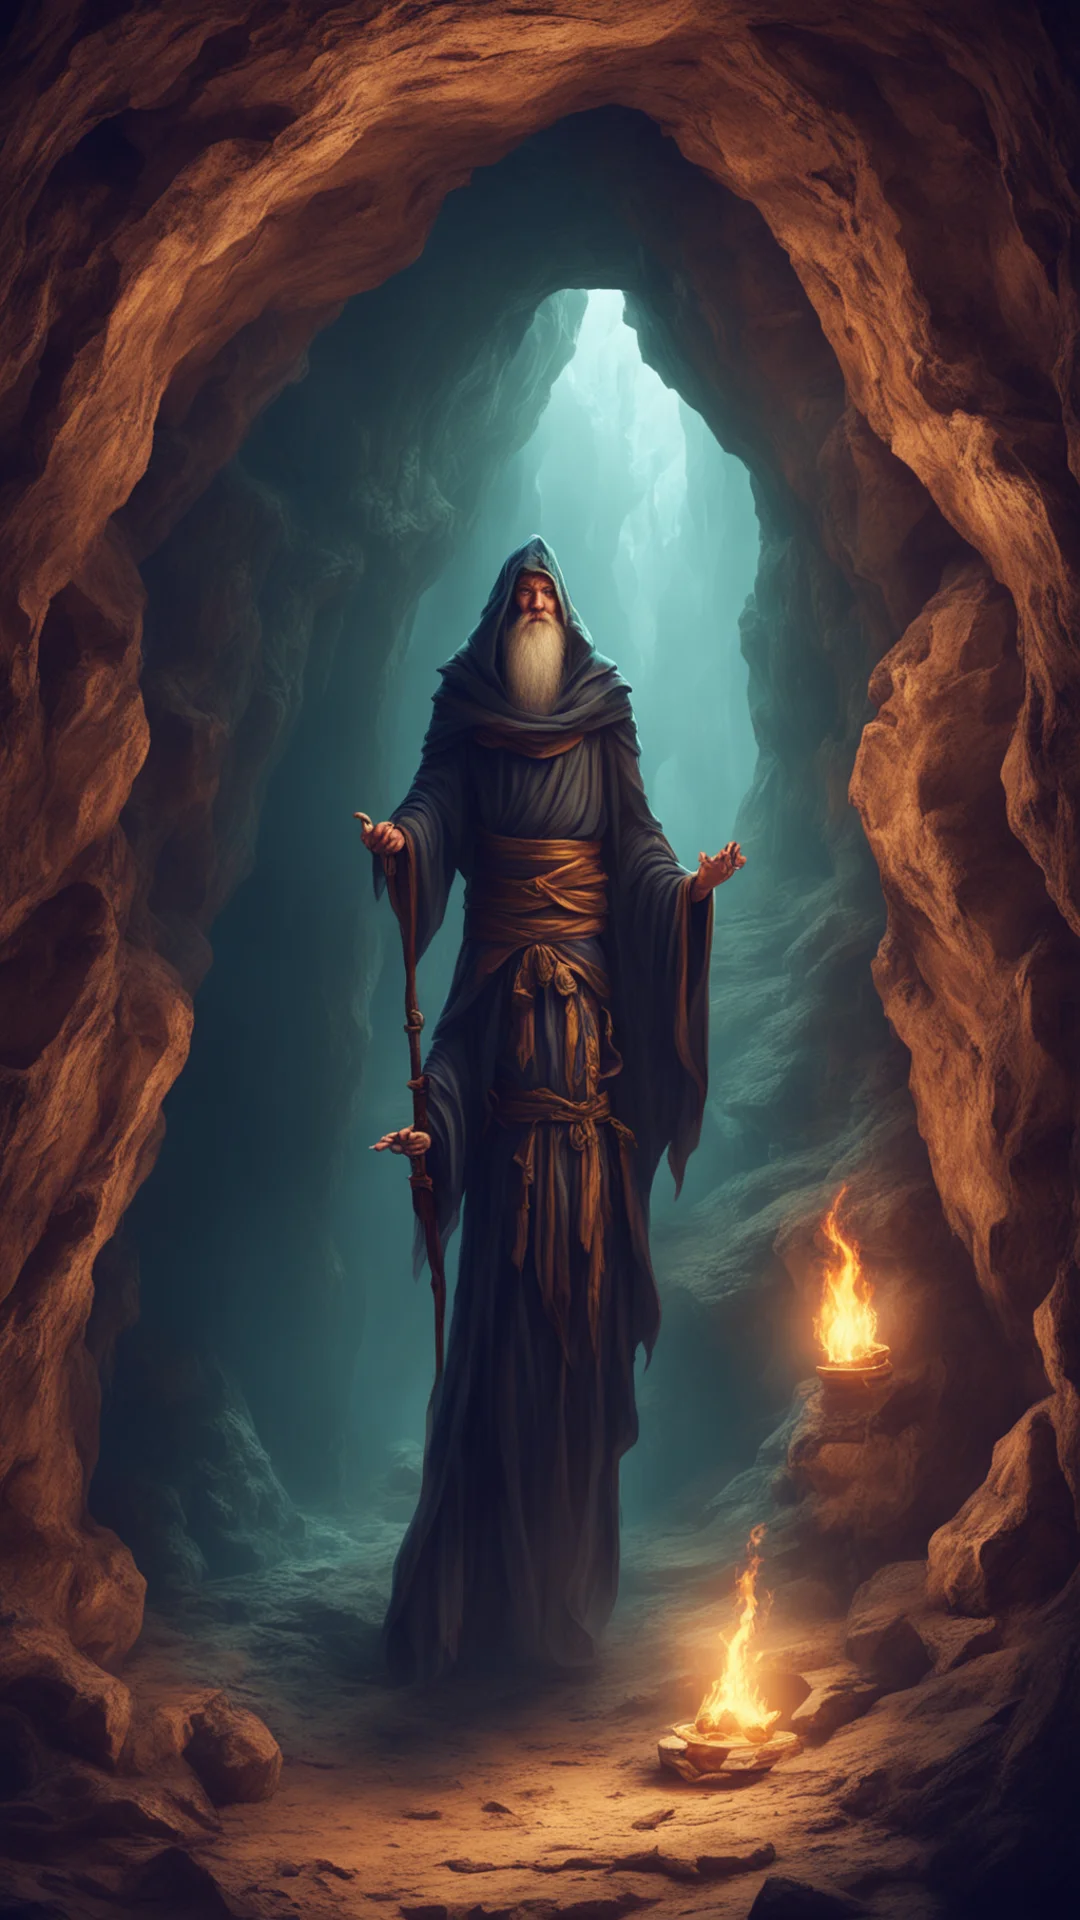 ancient sorcerer into a cave amazing awesome portrait 2 tall